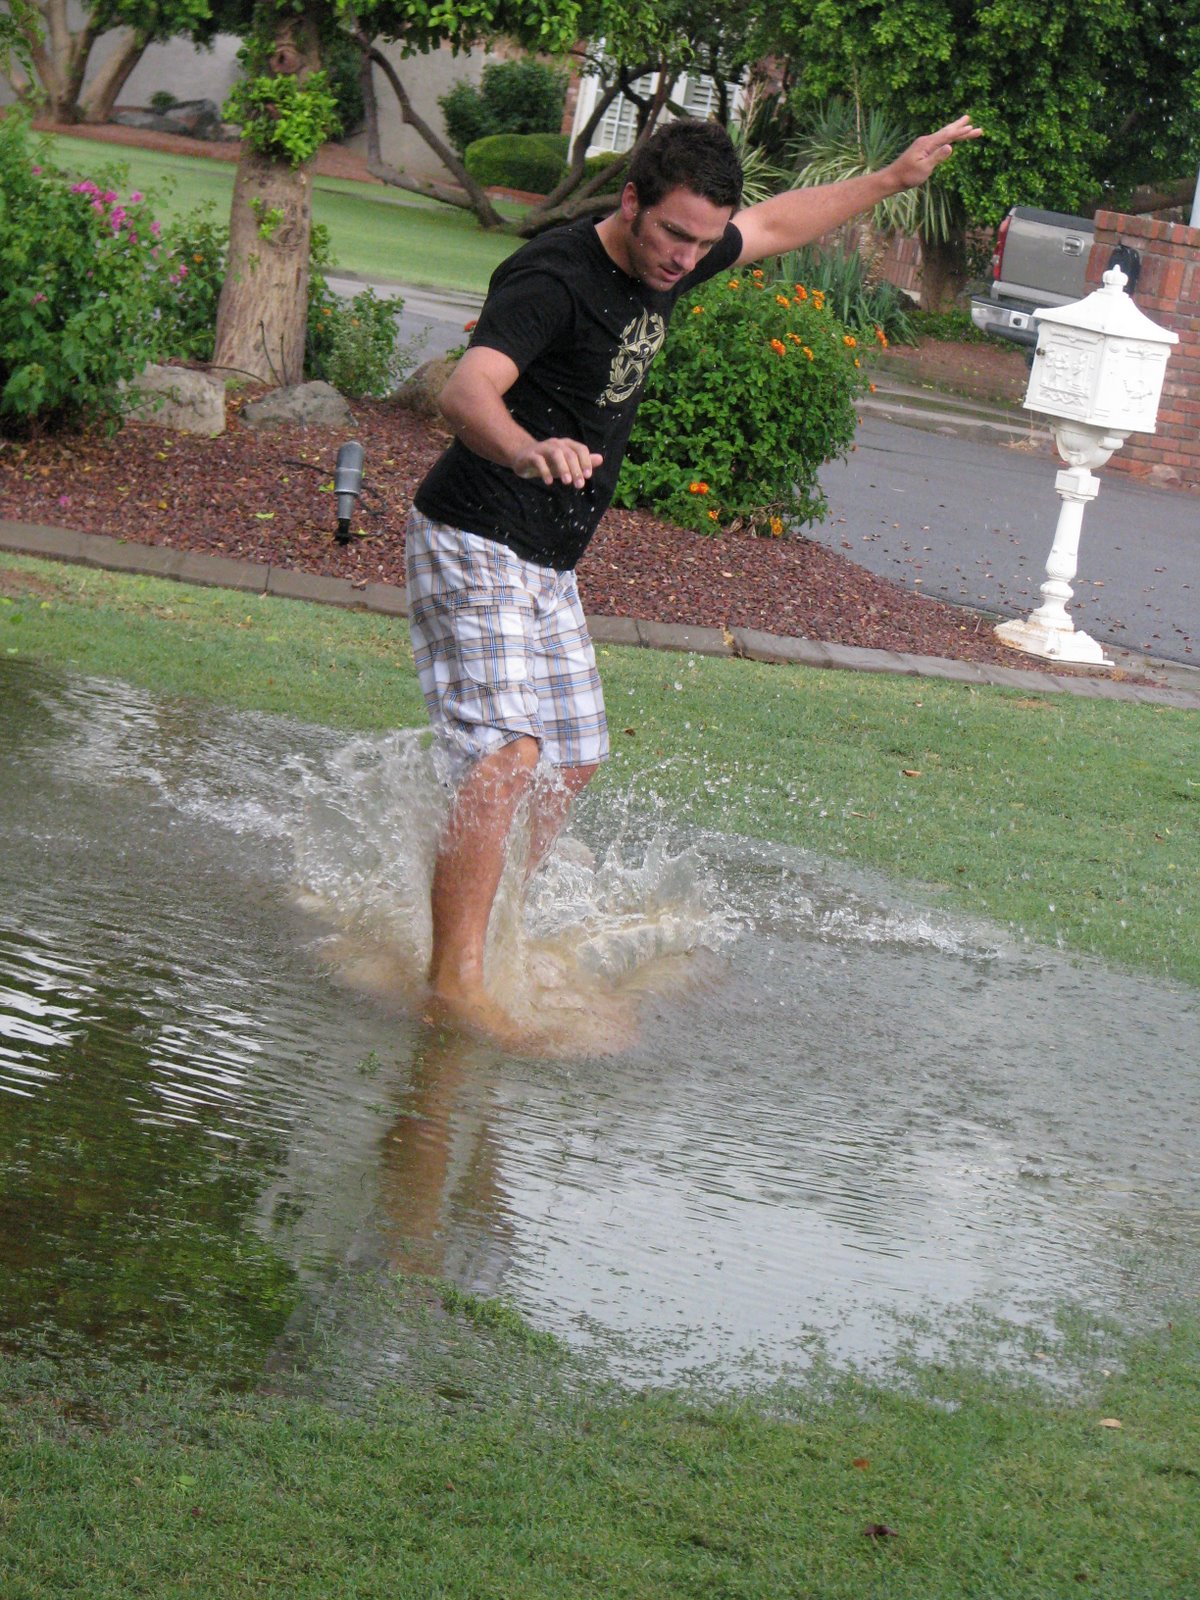 [Naters+playing+in+the+rain...+052.jpg]